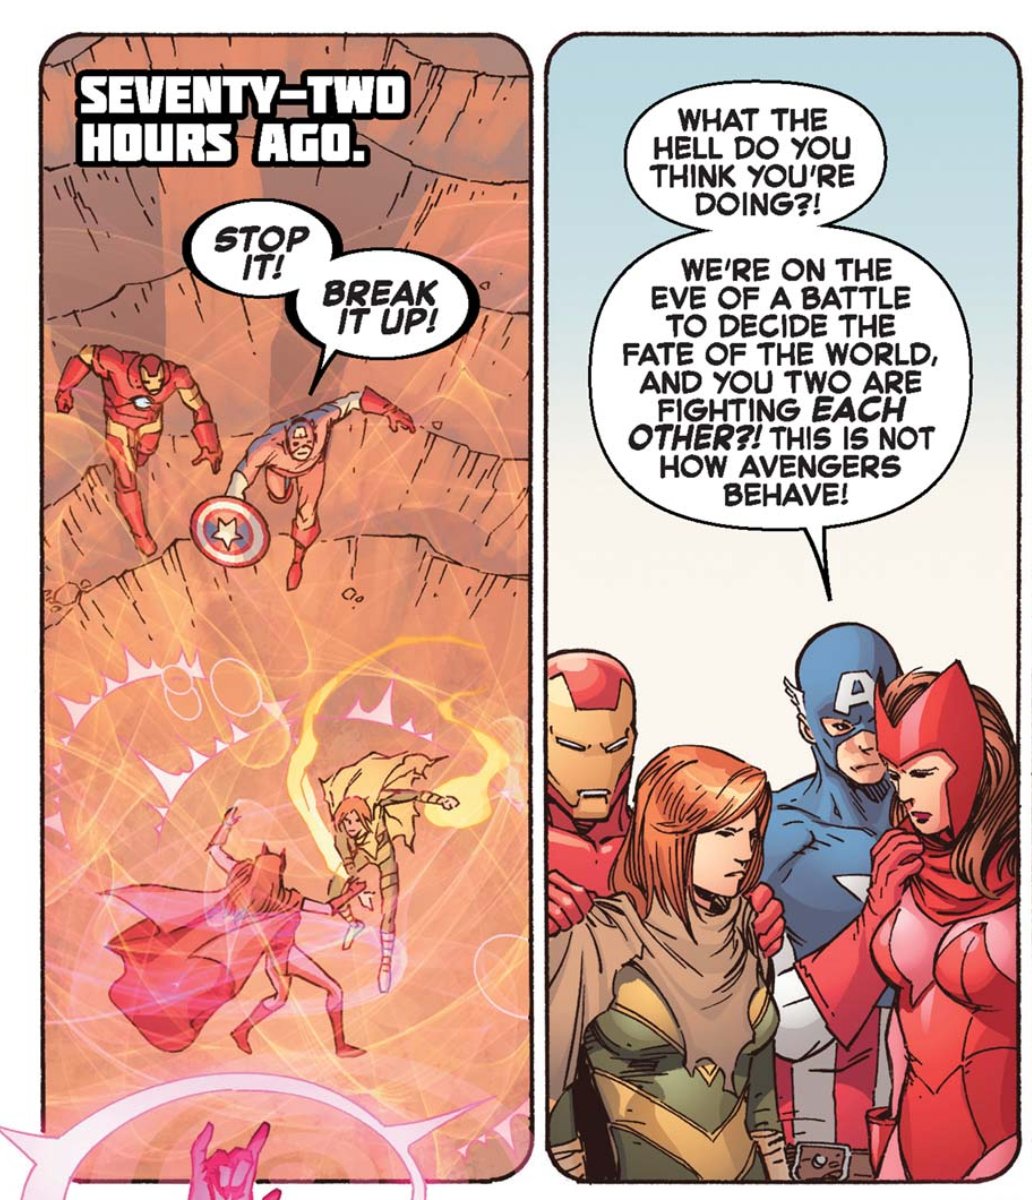 Is that really not what Avengers do?